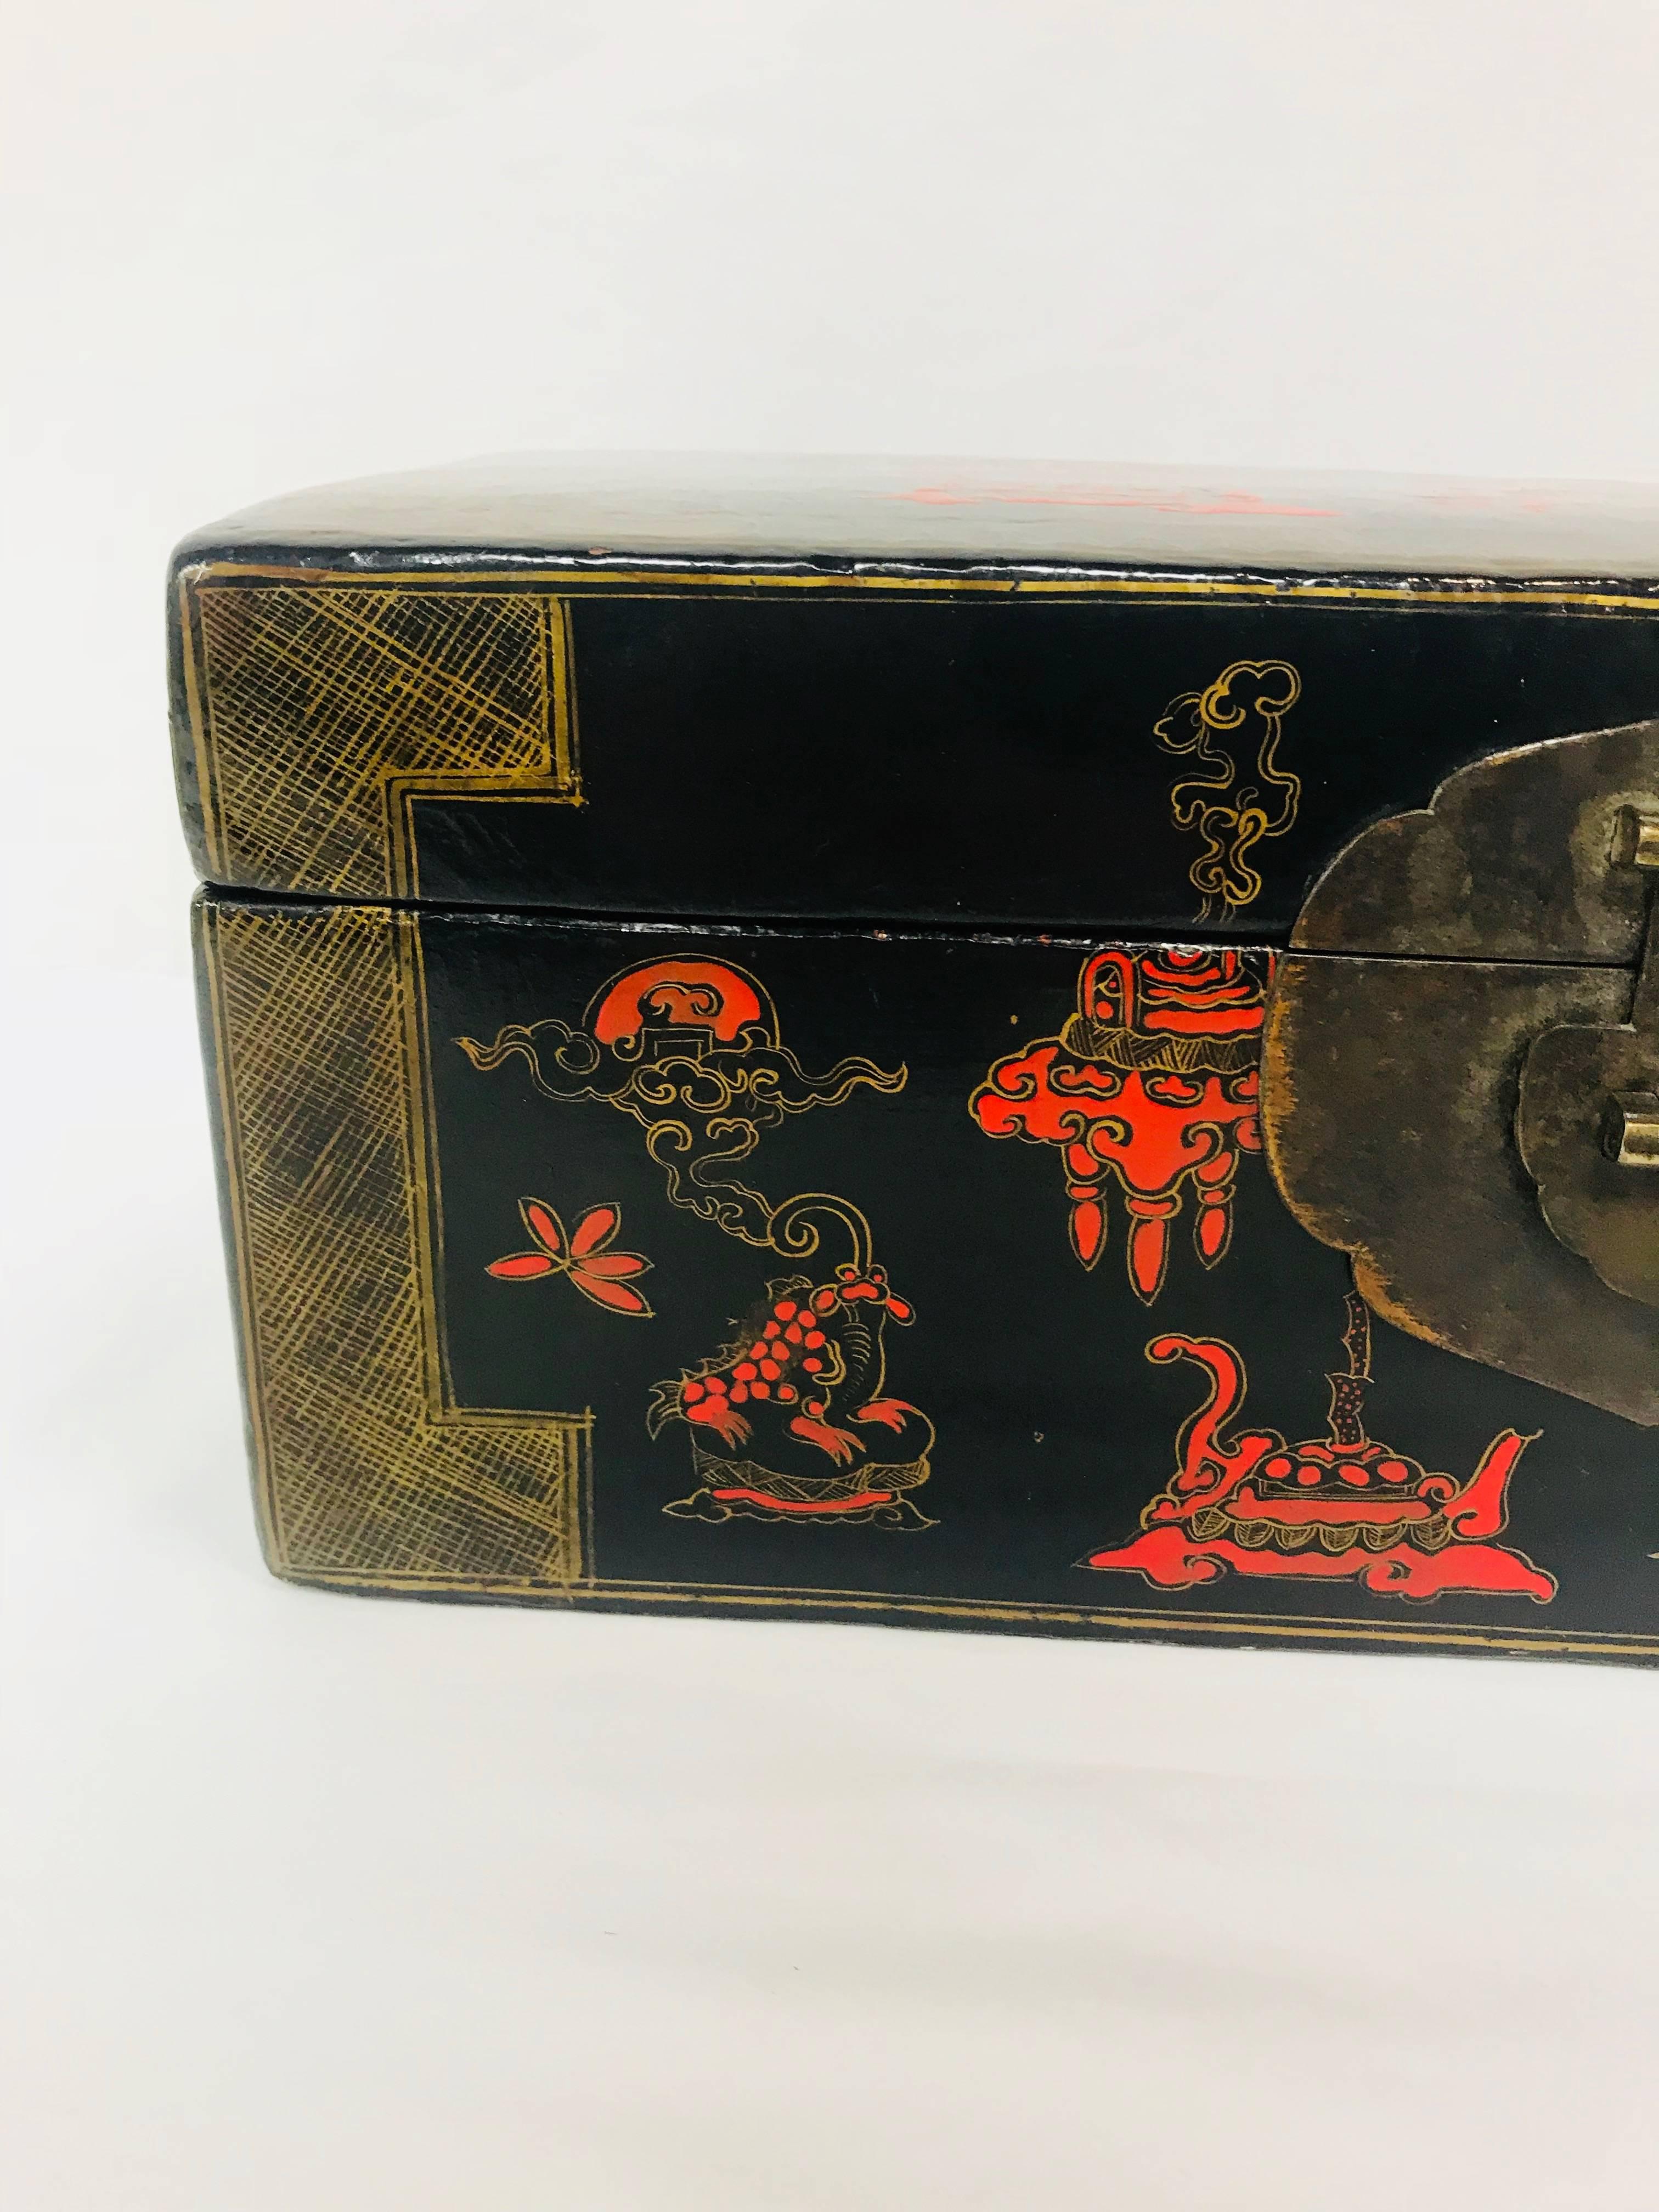 Black and Red Lacquer Asian Box For Sale 8